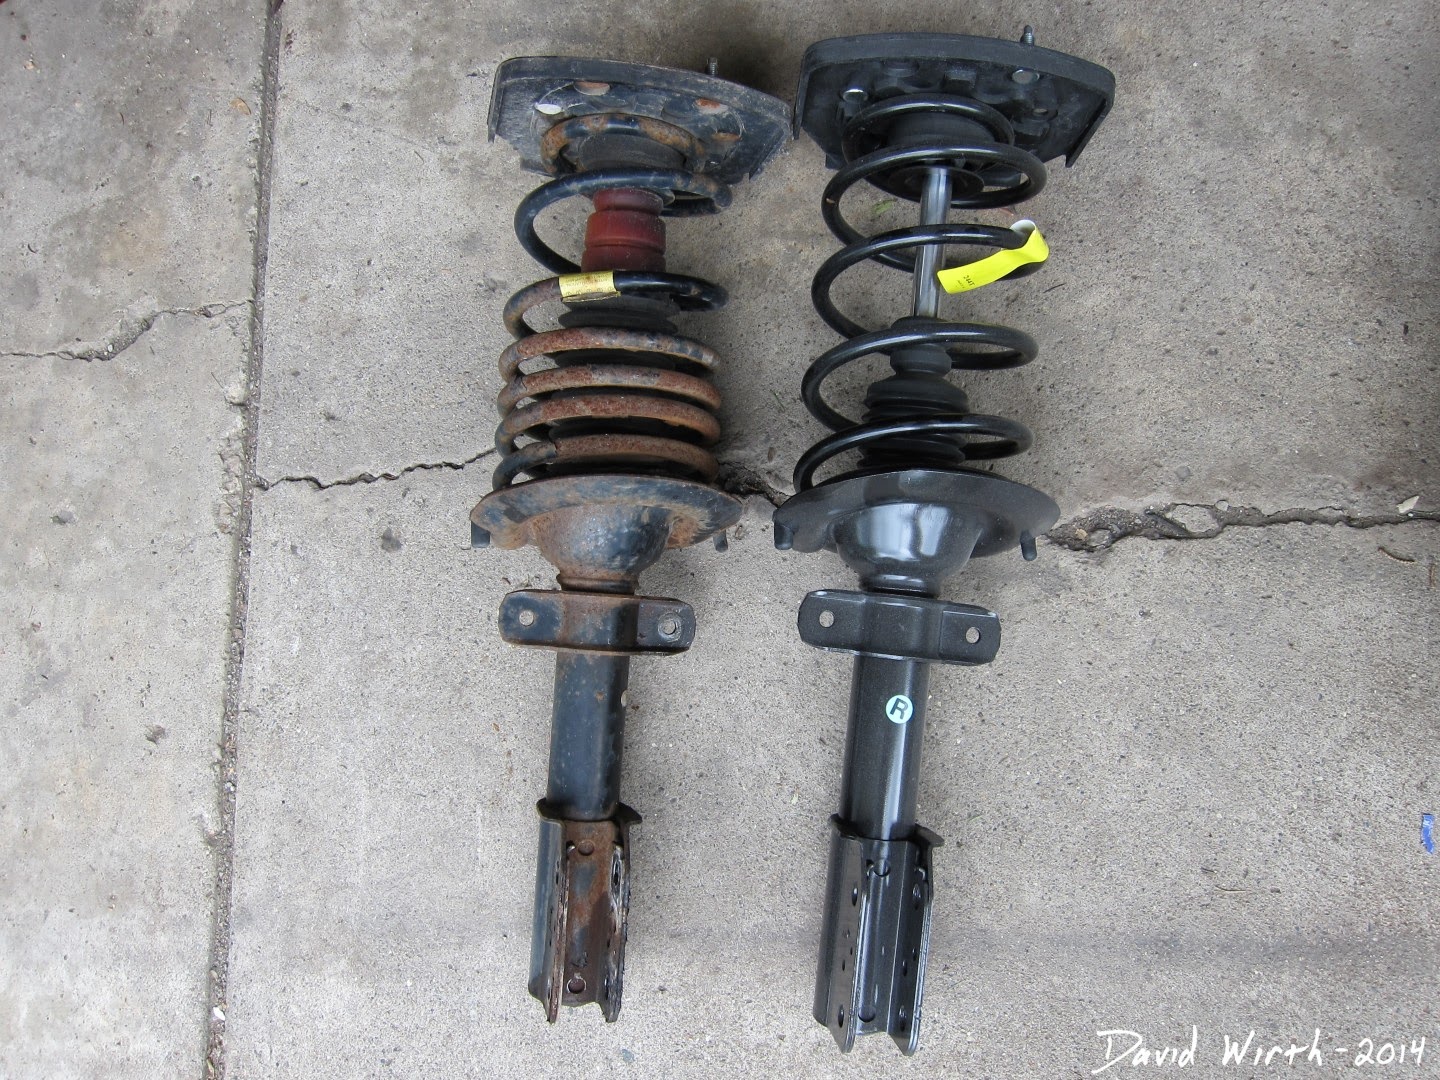 compare monroe struts, quick strut, shocks, old, new, rusted, collapsed